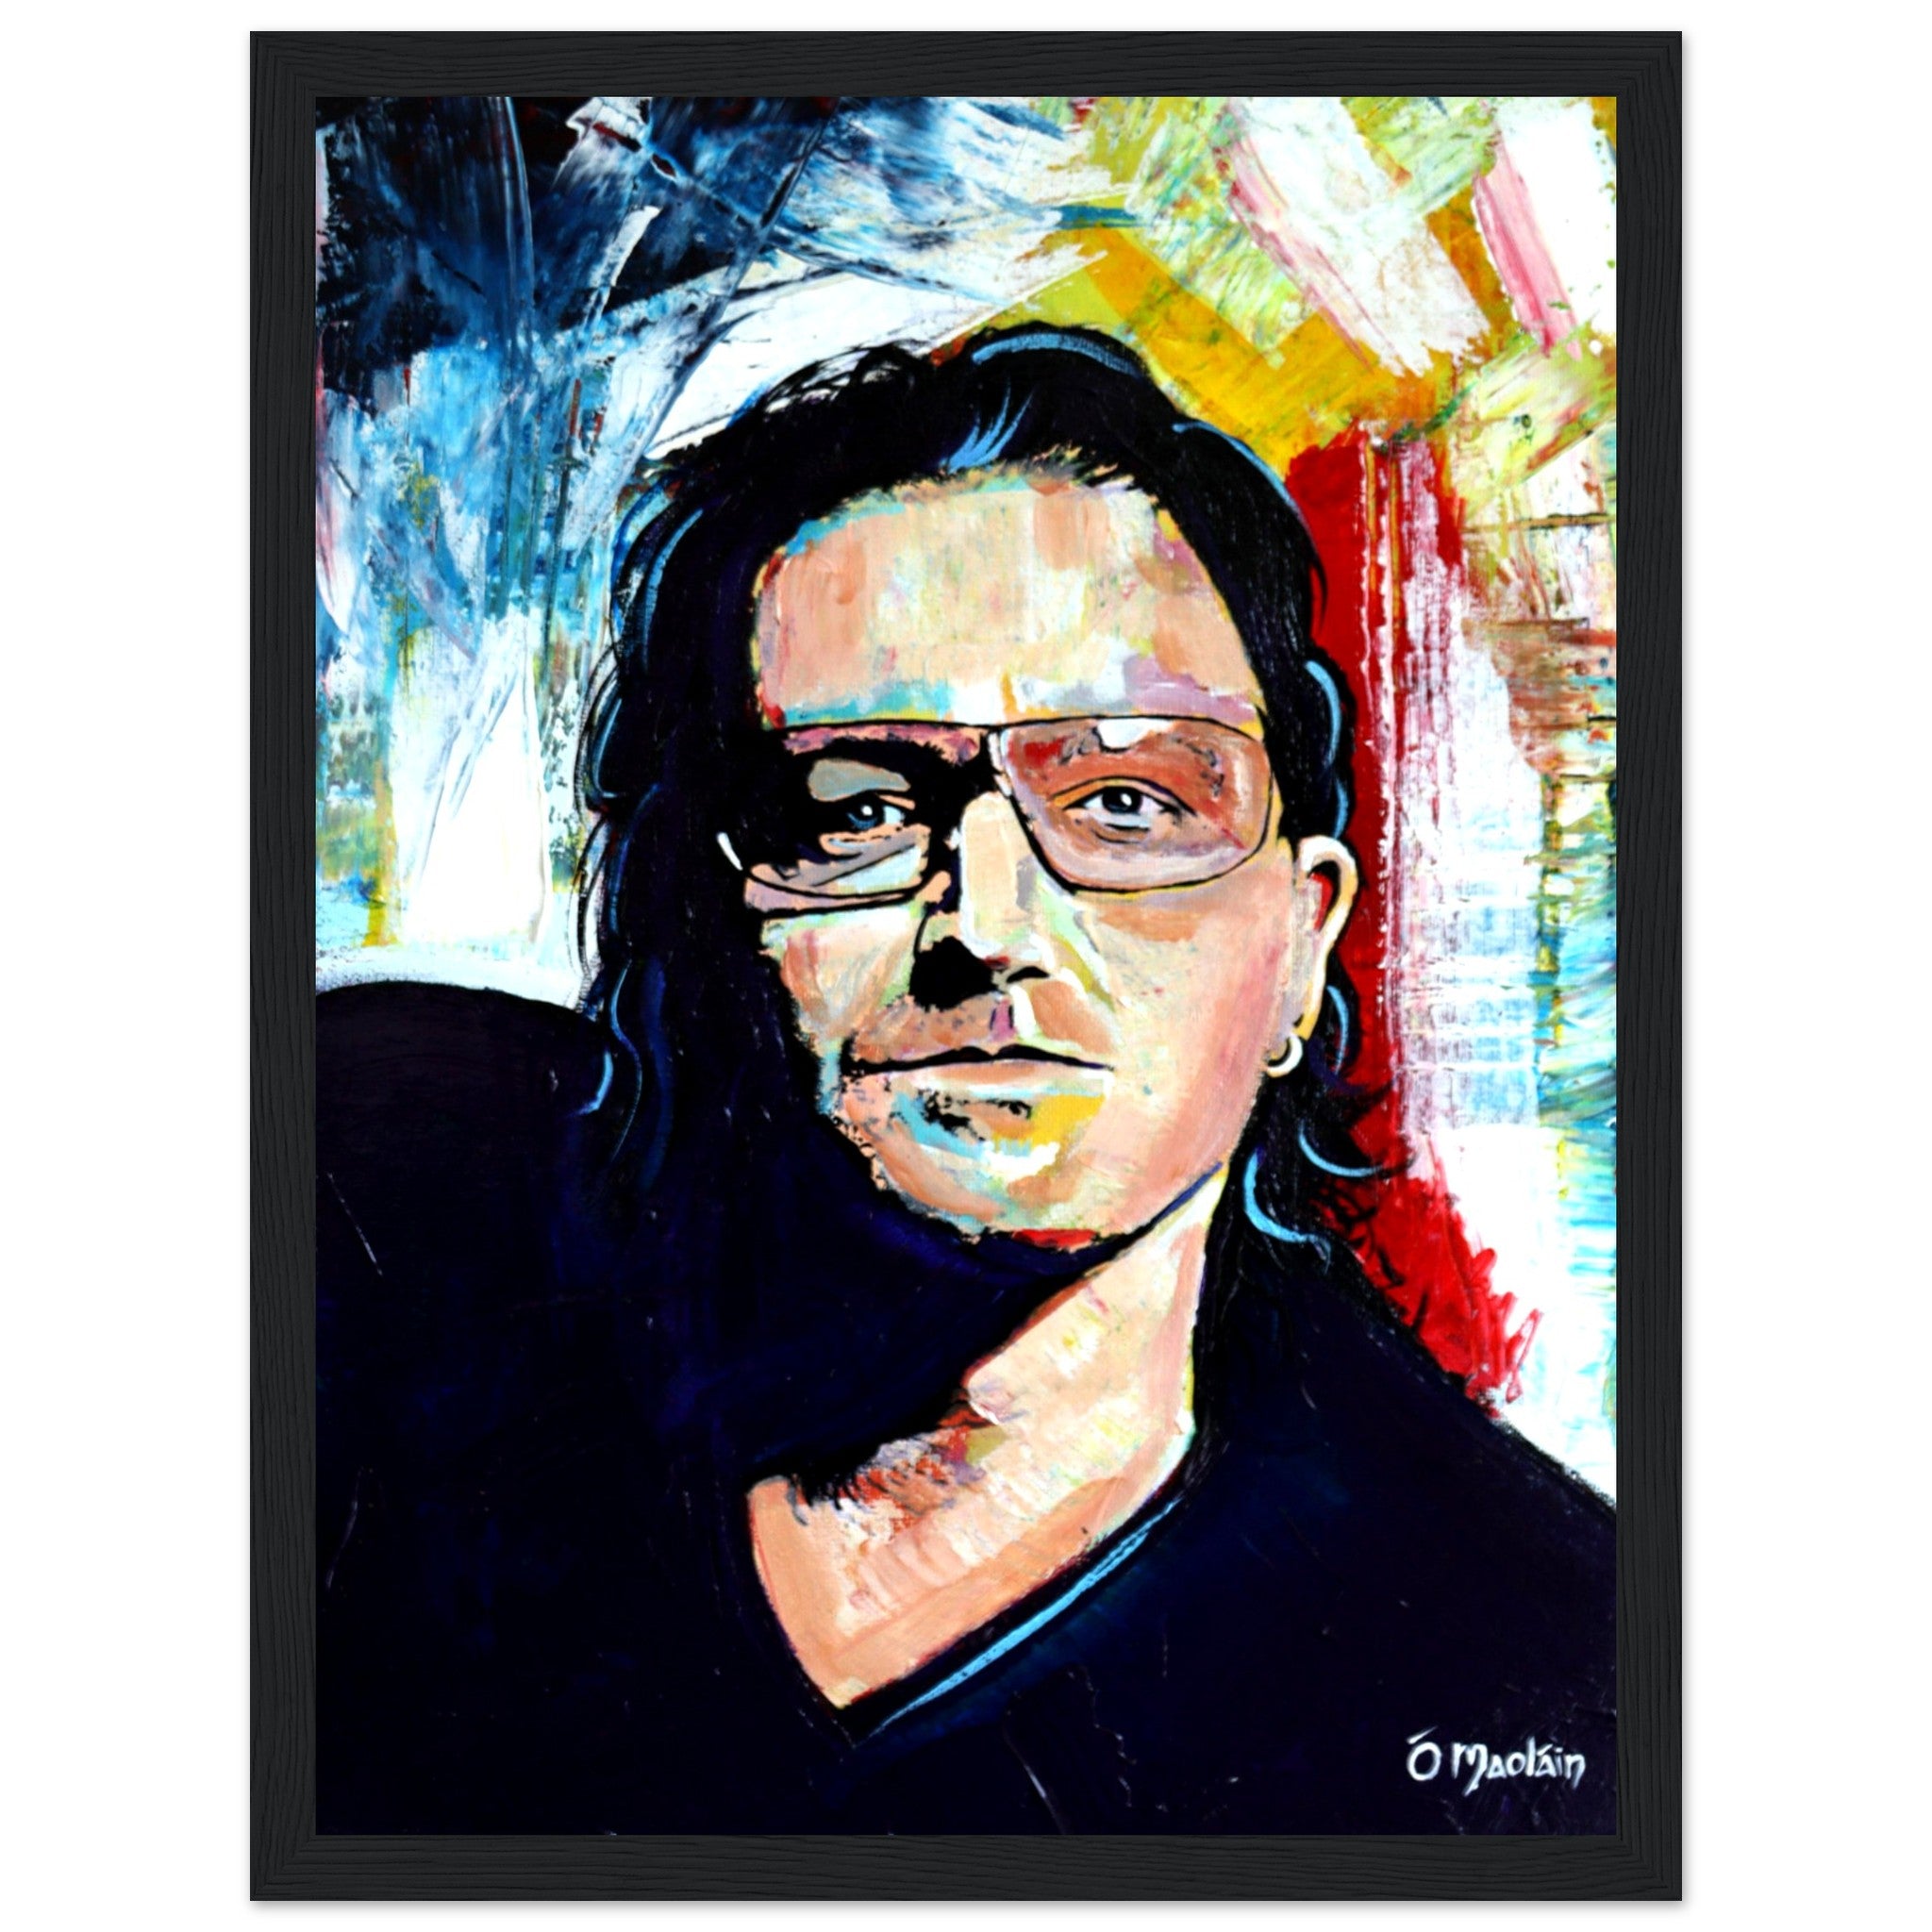 6d535088-a0a6-49a4-b4df-d8004841e5e4Vibrant, colorful framed wall art print of Bono from U2 by Irish artist Ó Maoláin. This portrait captures Bono's iconic stage presence, adding rock 'n' roll flair to your decor. A unique statement piece for U2 fans, blending music and art beautifully.